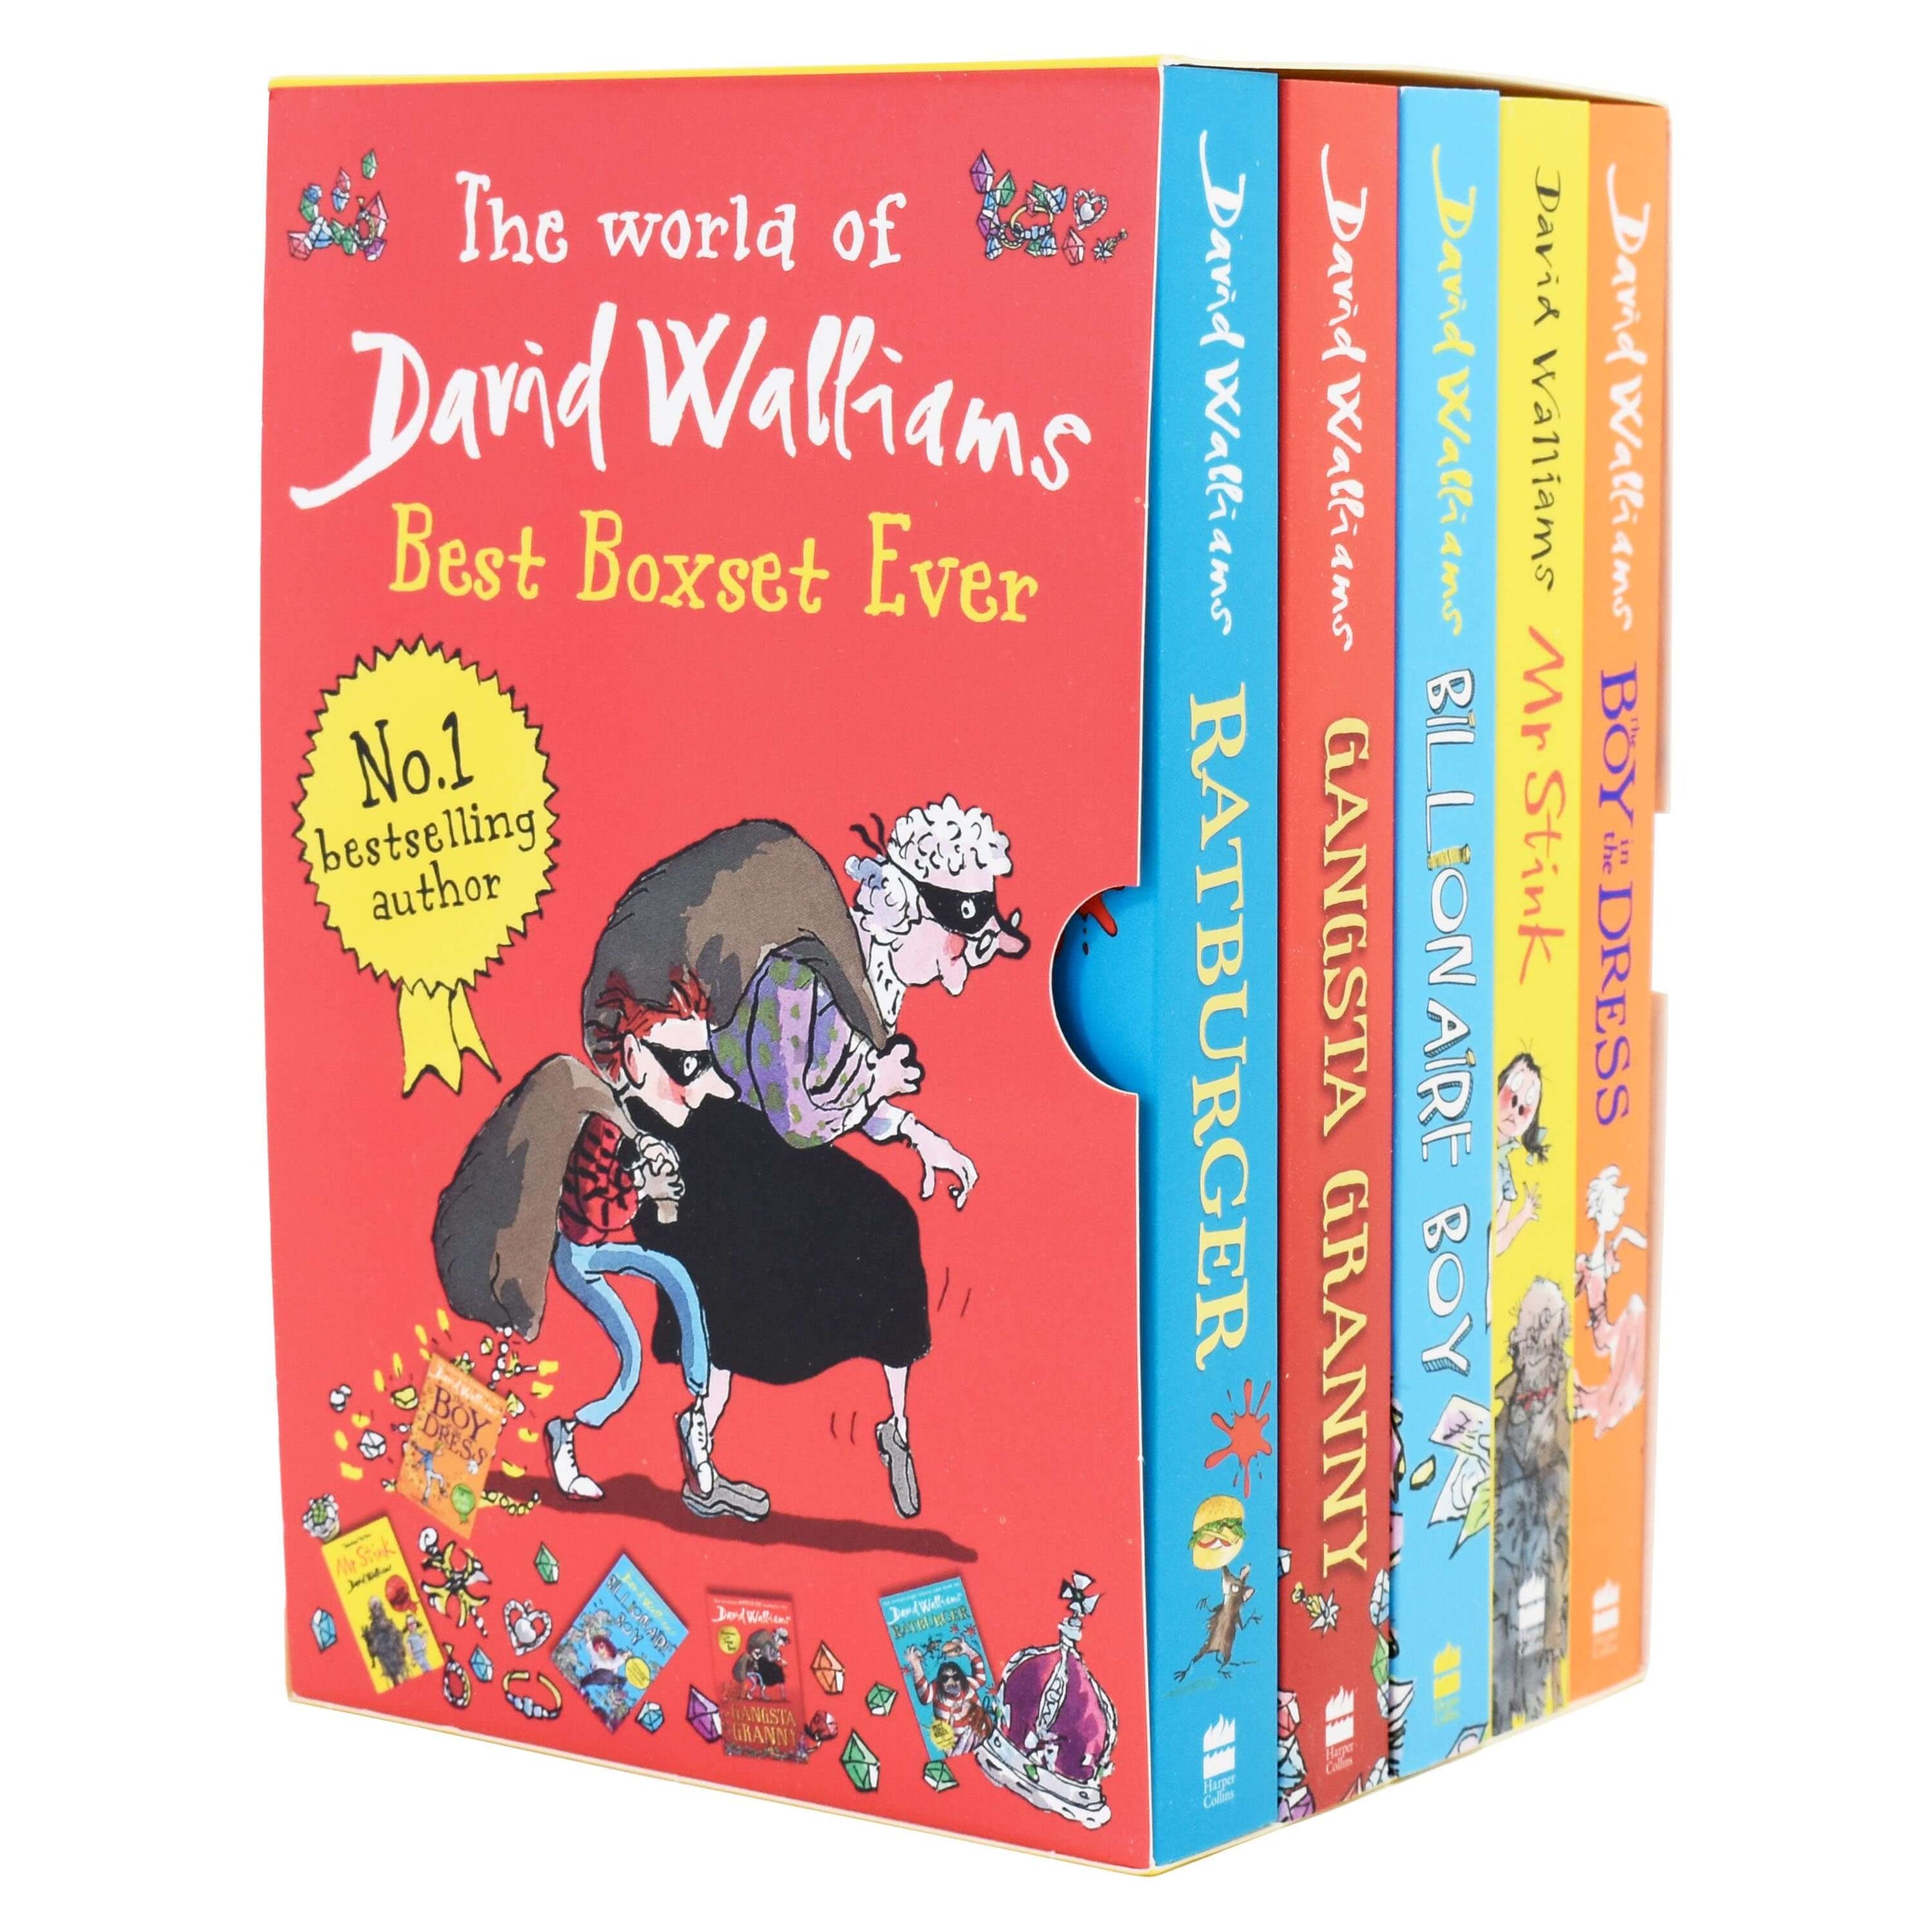 david walliams books for 12 year olds